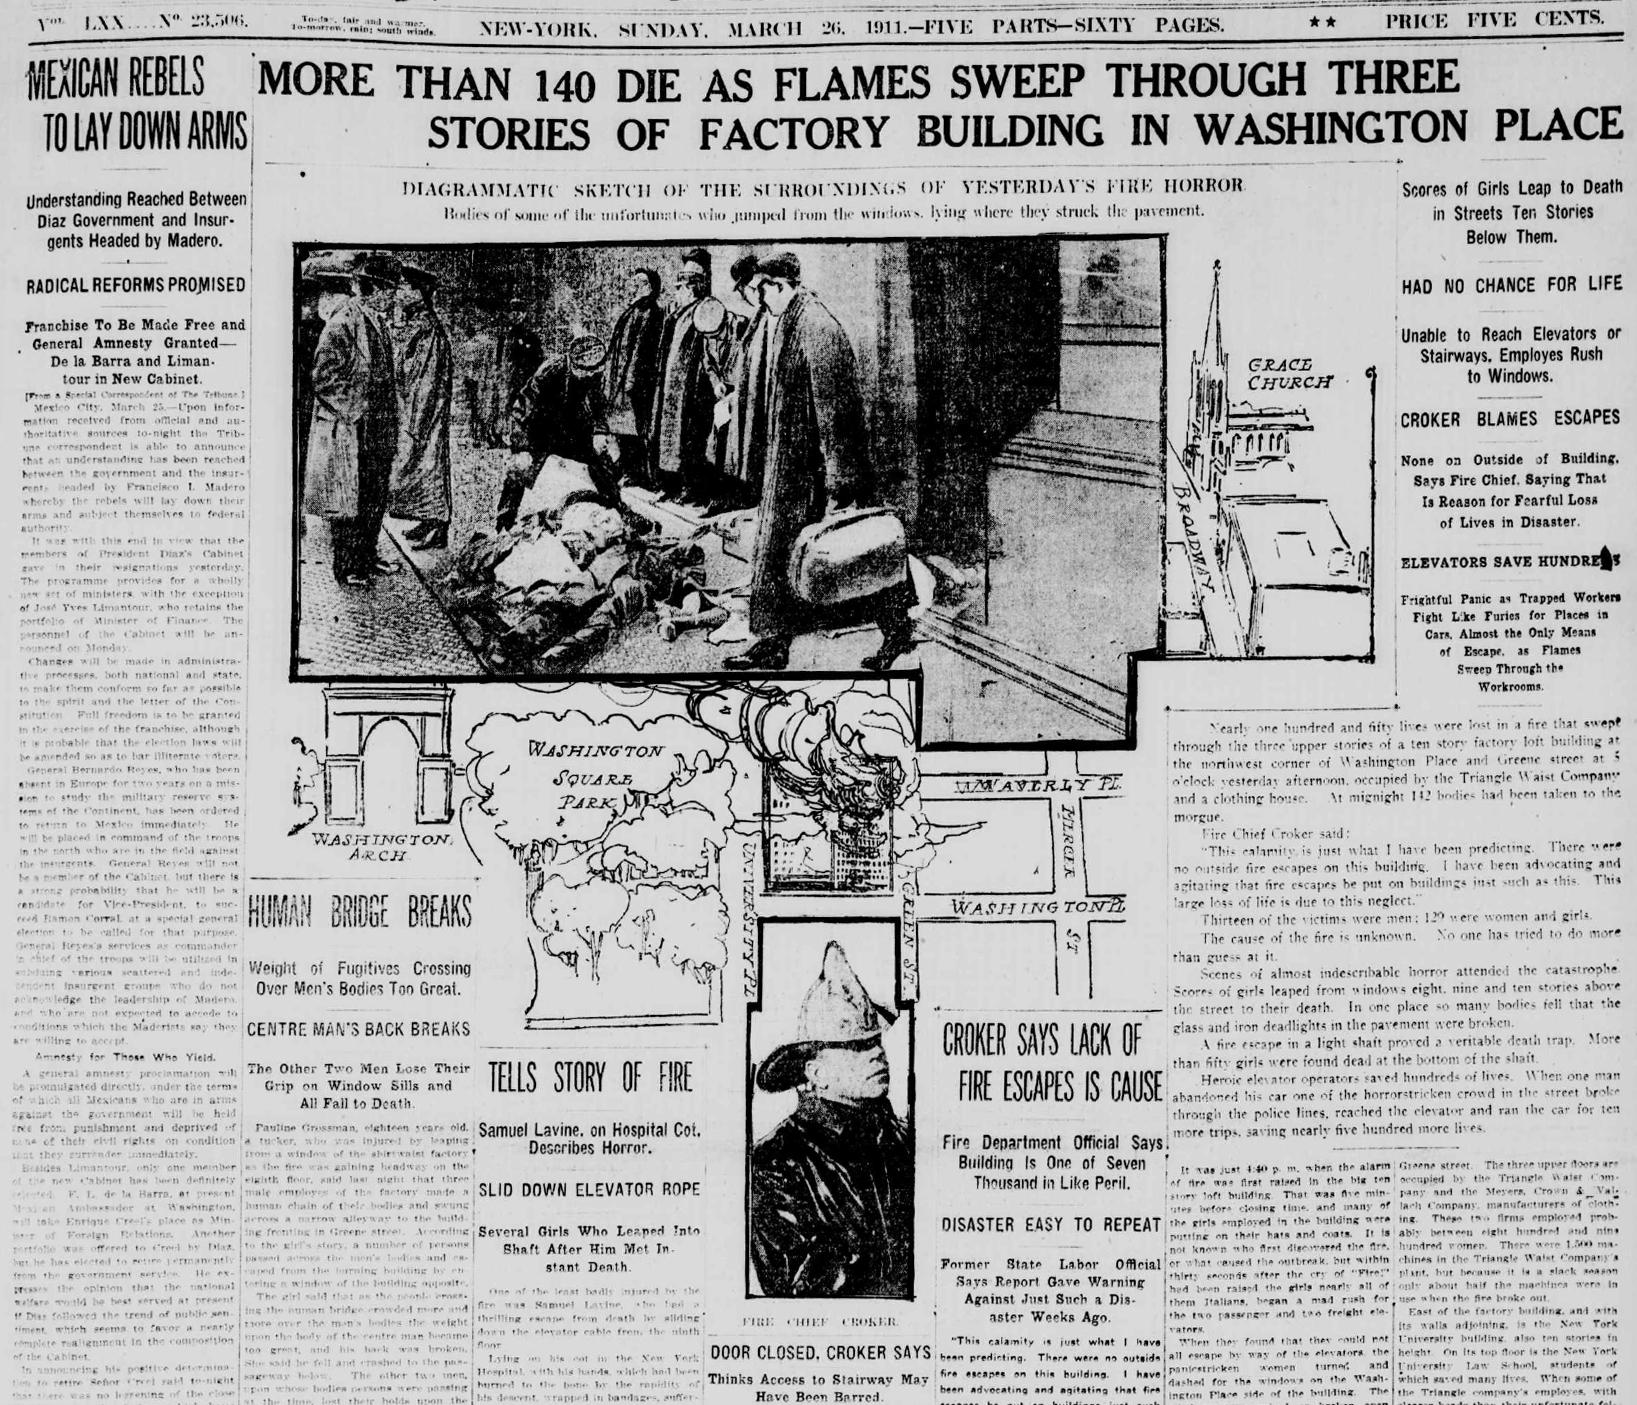 Source: New-York Tribune. 26 March 1911. Library of Congress